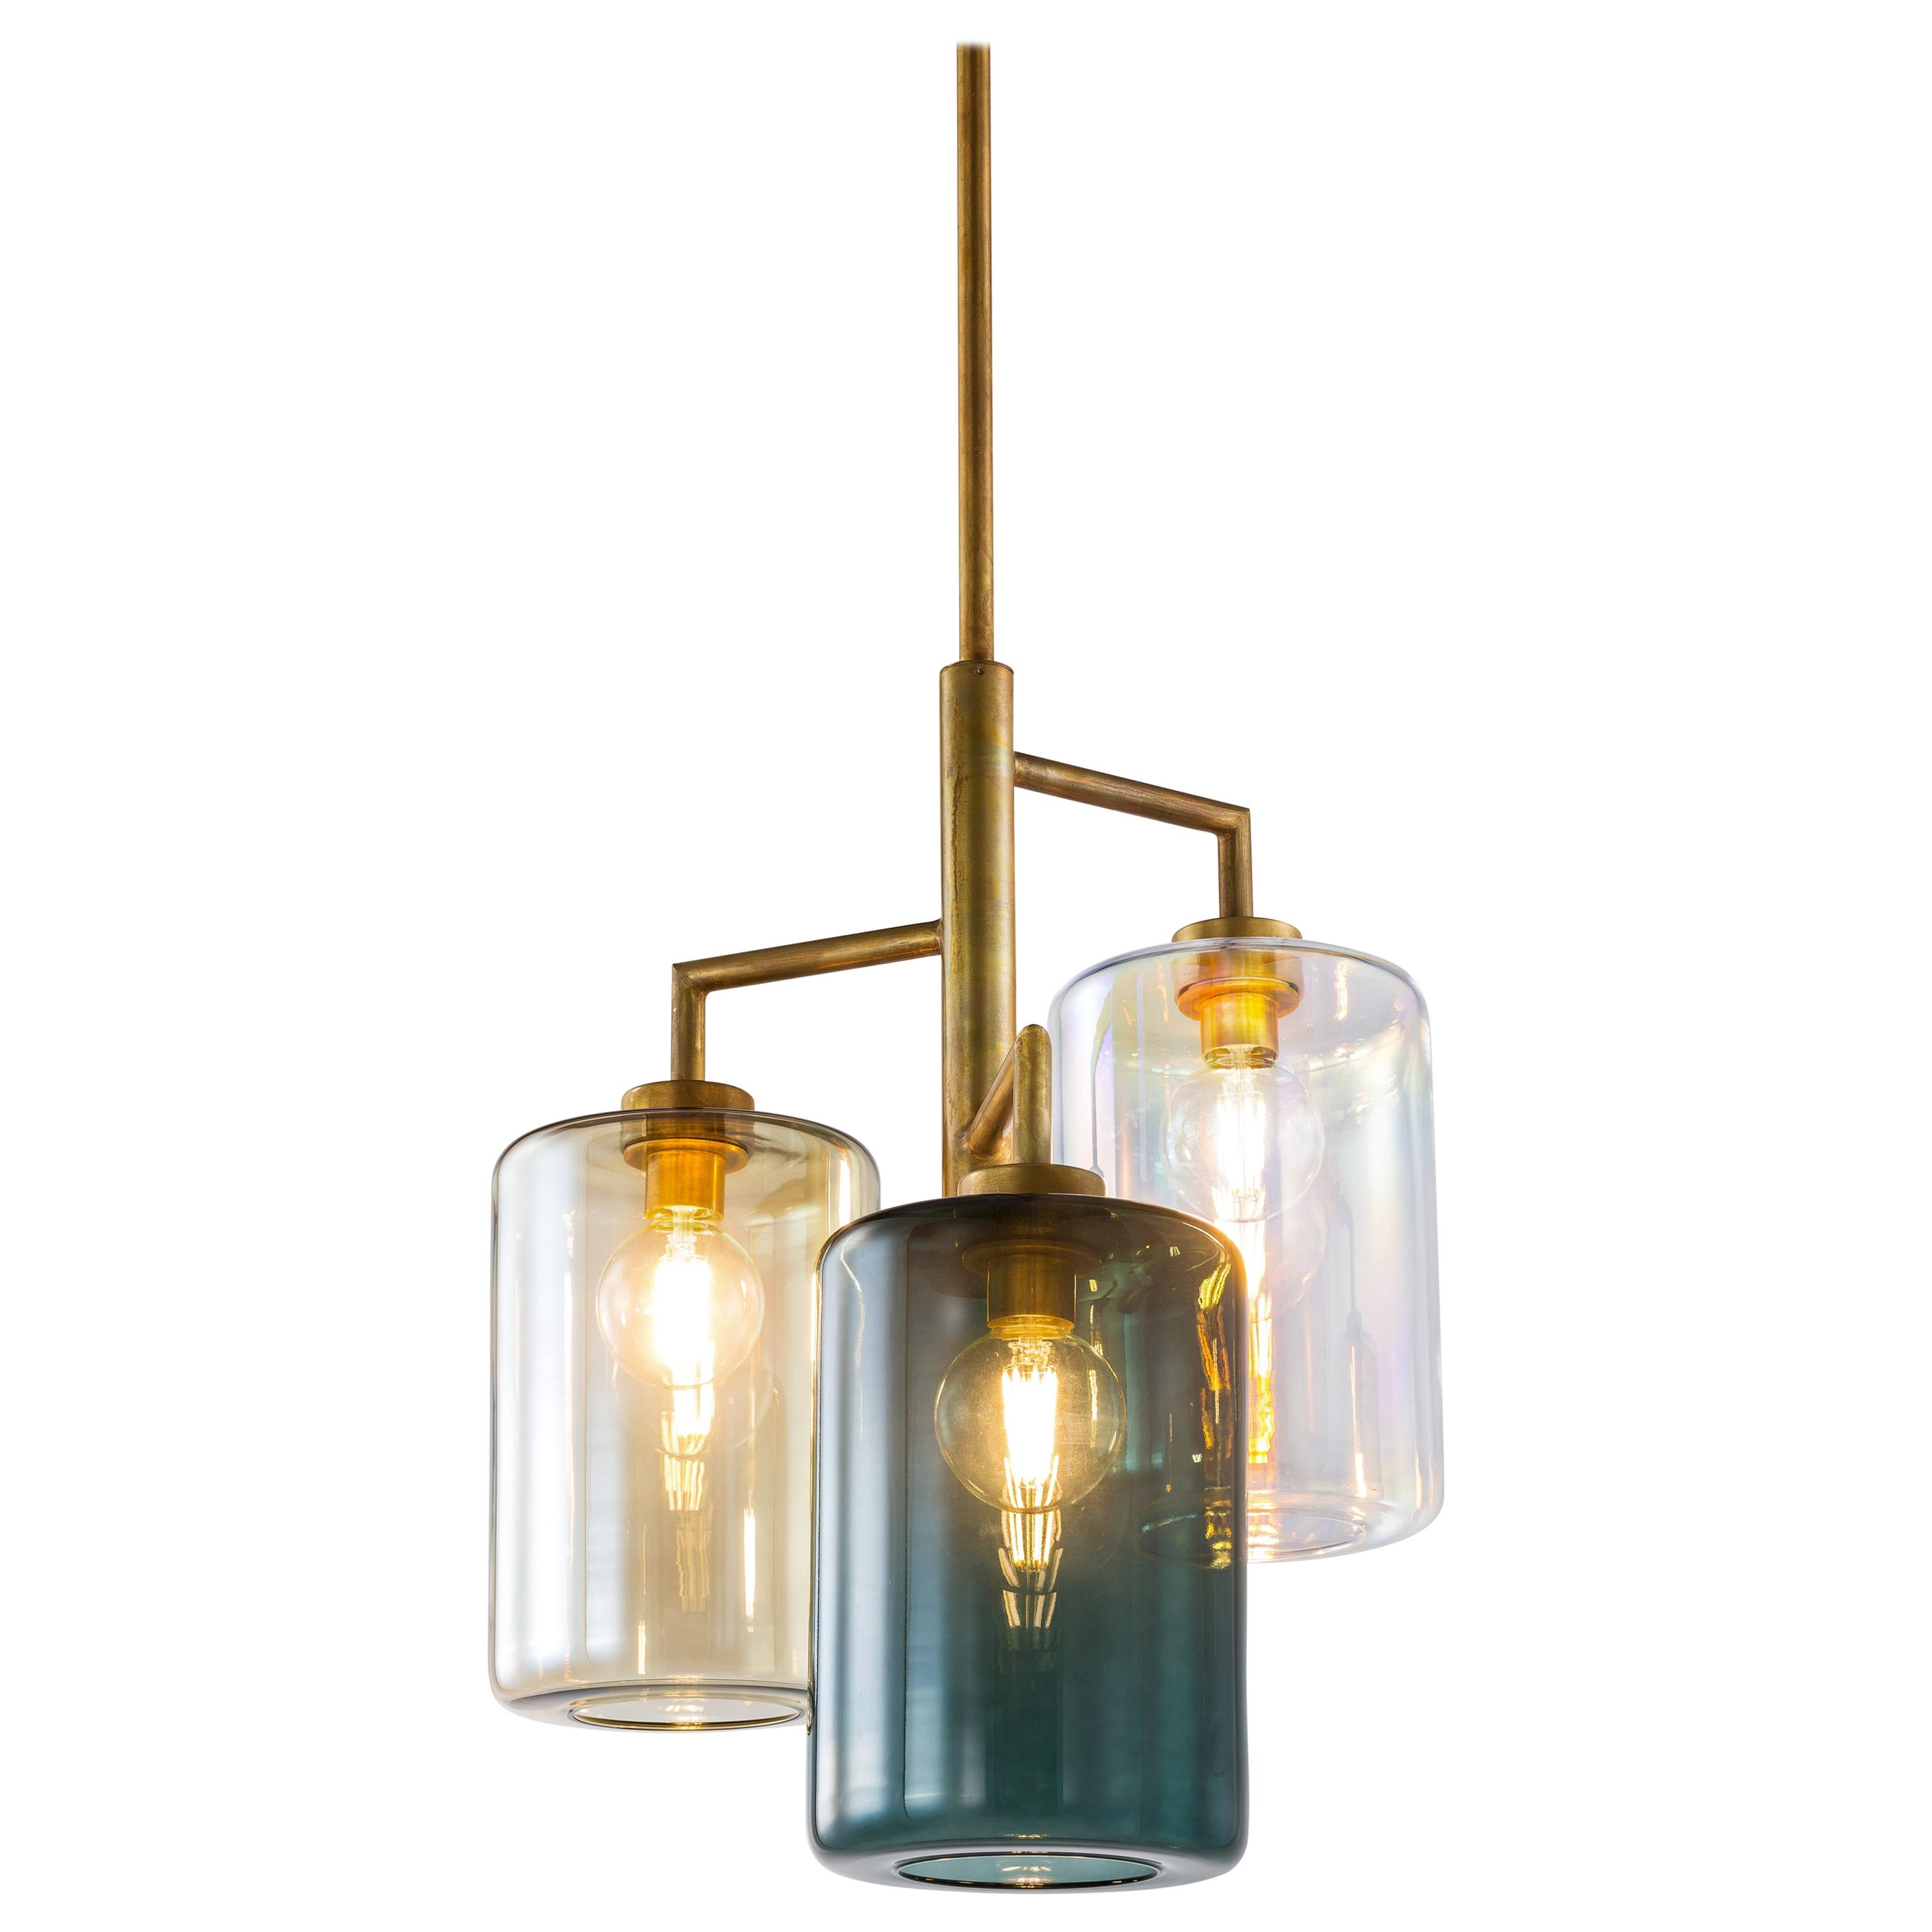 Modern Pendant with Colored Glass in a Brass Burnished Finish, Louise